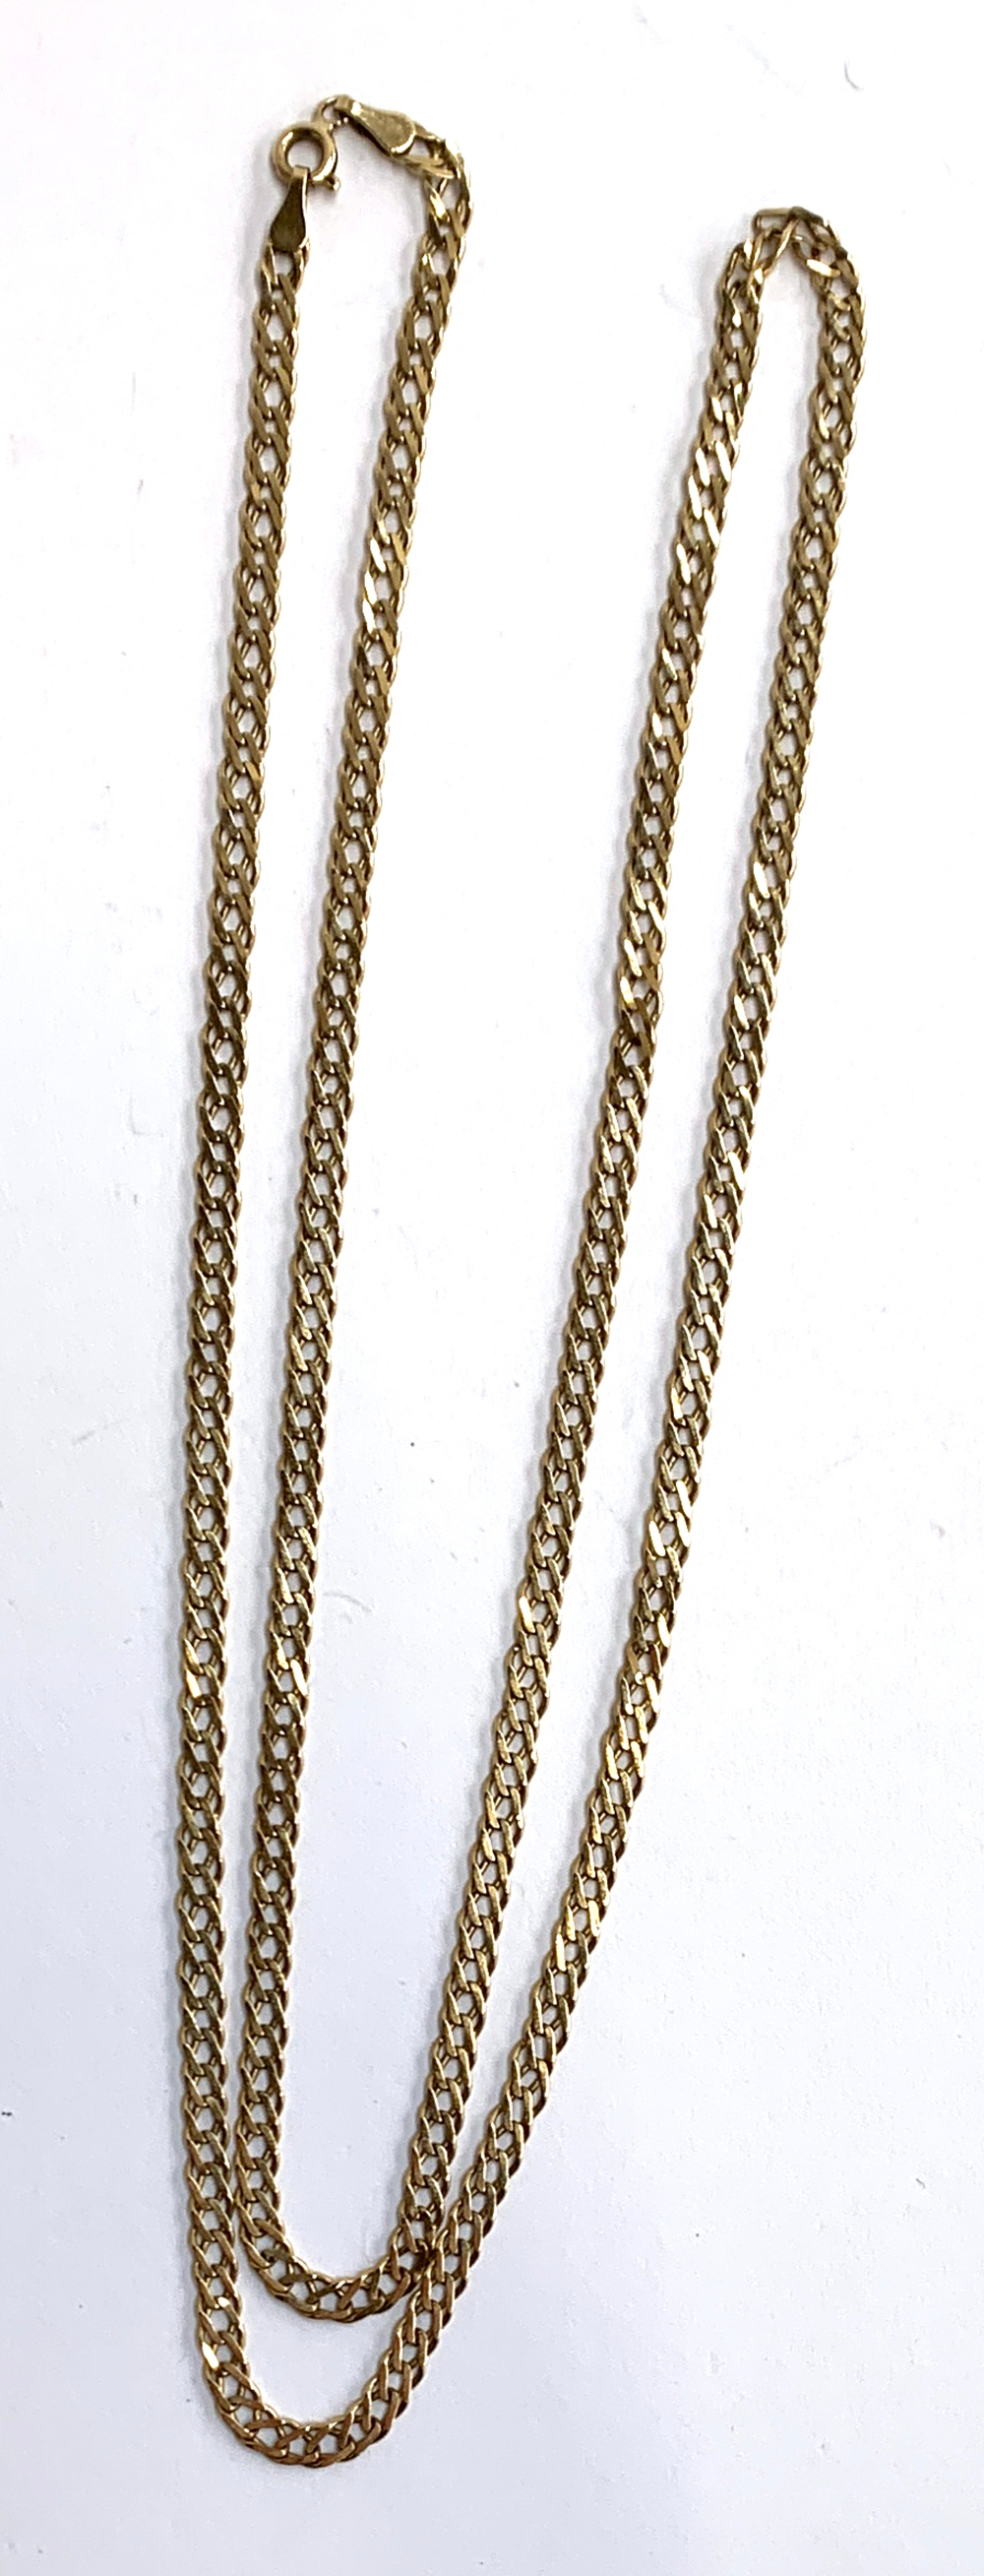 A 9ct golf flat link chain, 78cmL, approx. 11.5g